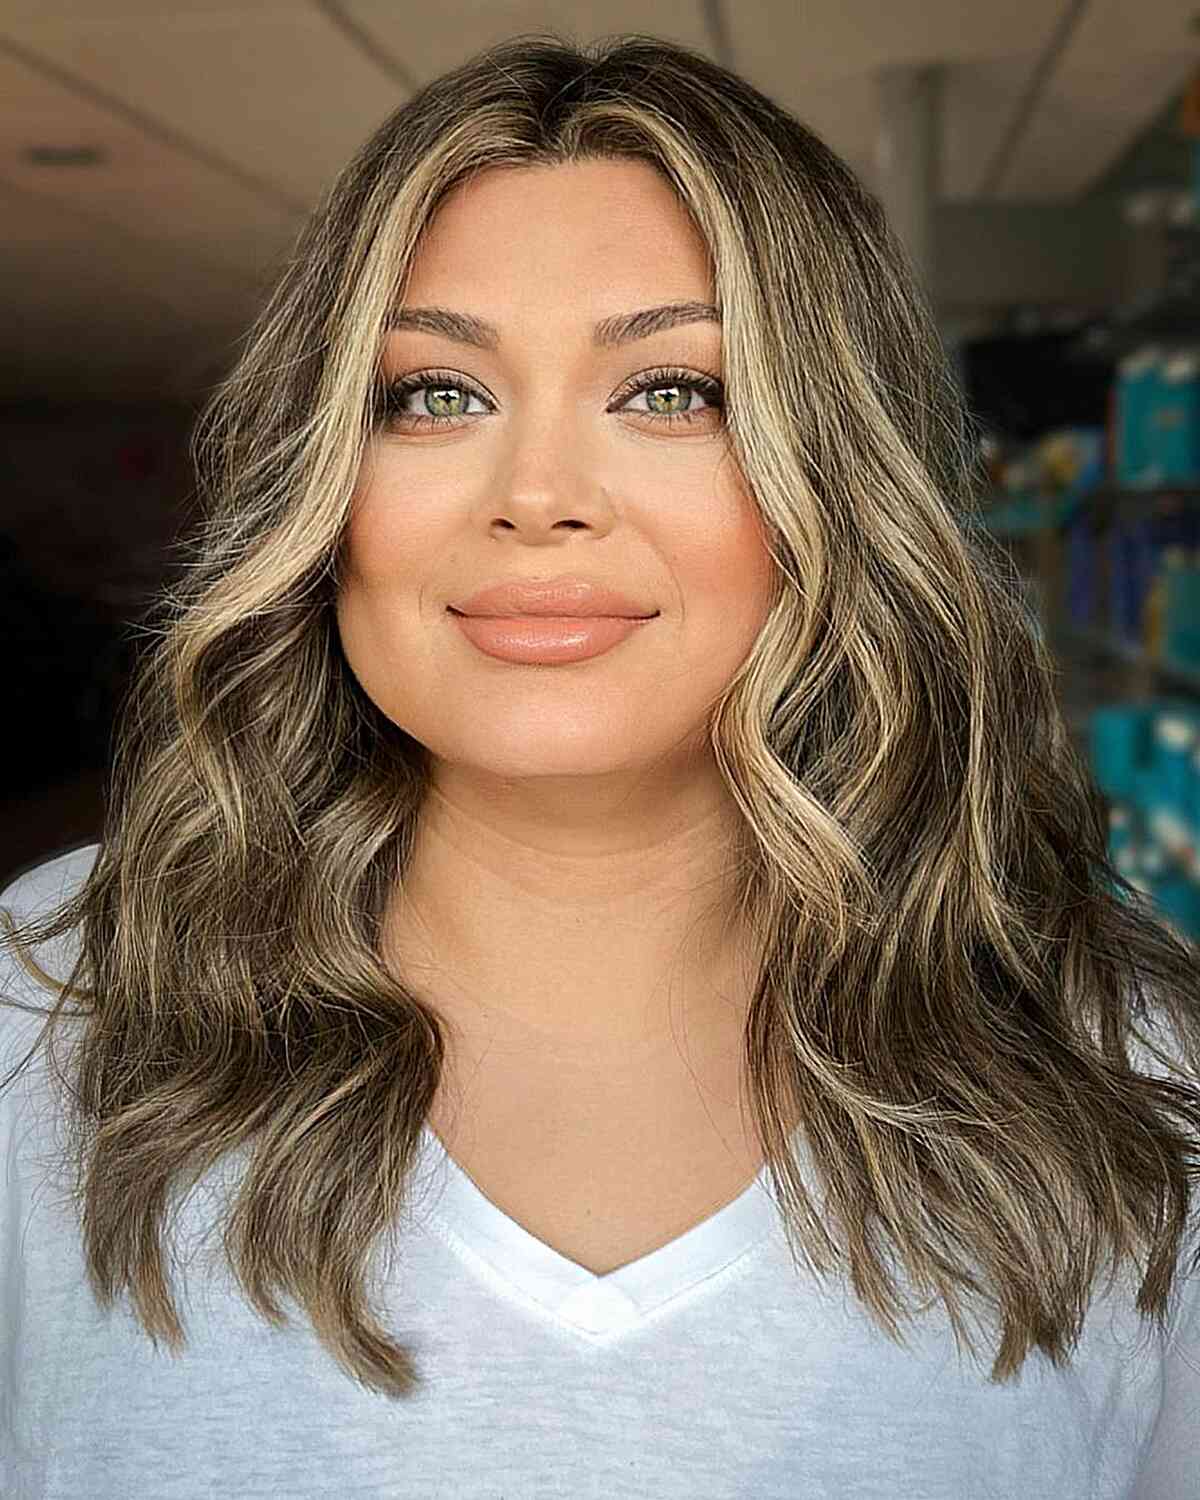 Perfectly Placed Highlights on Mid-Length Hair for Round Faces